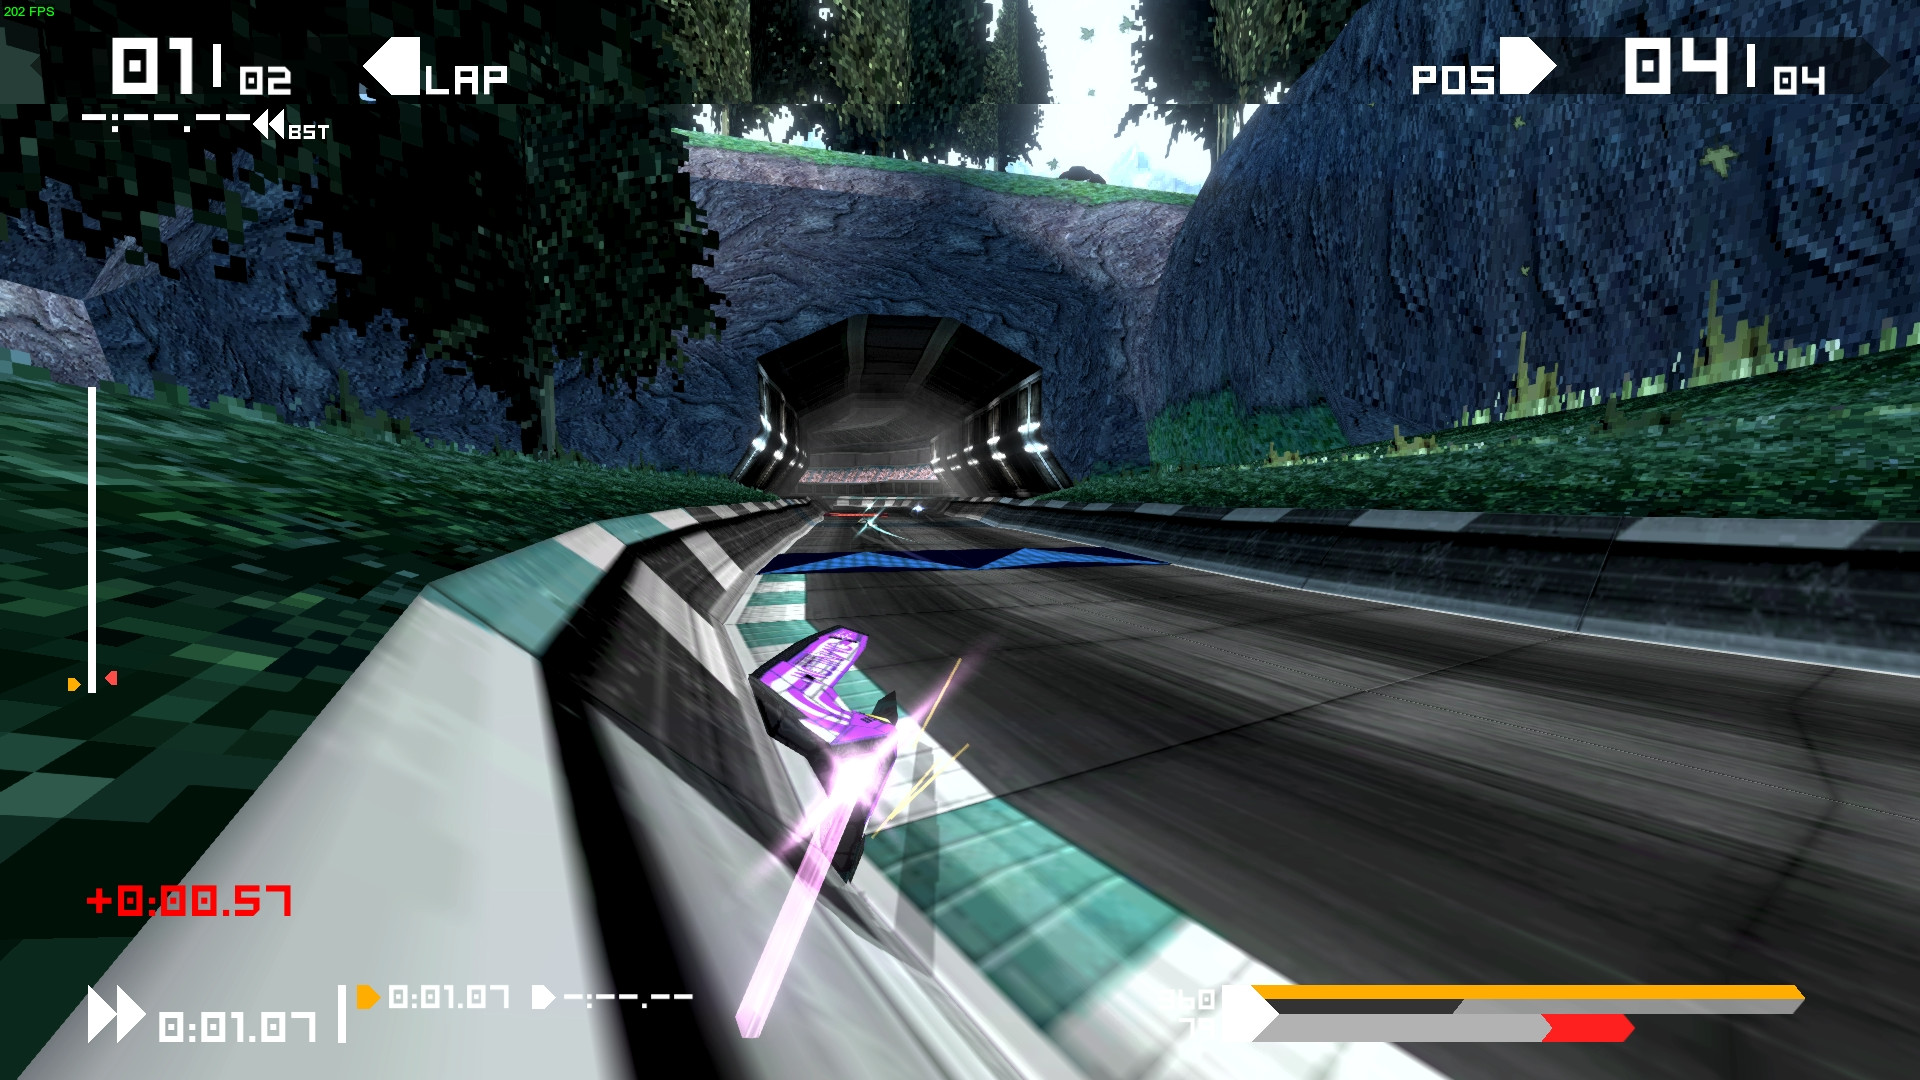 Wipeout-inspired racer BallisticNG now has Linux support.